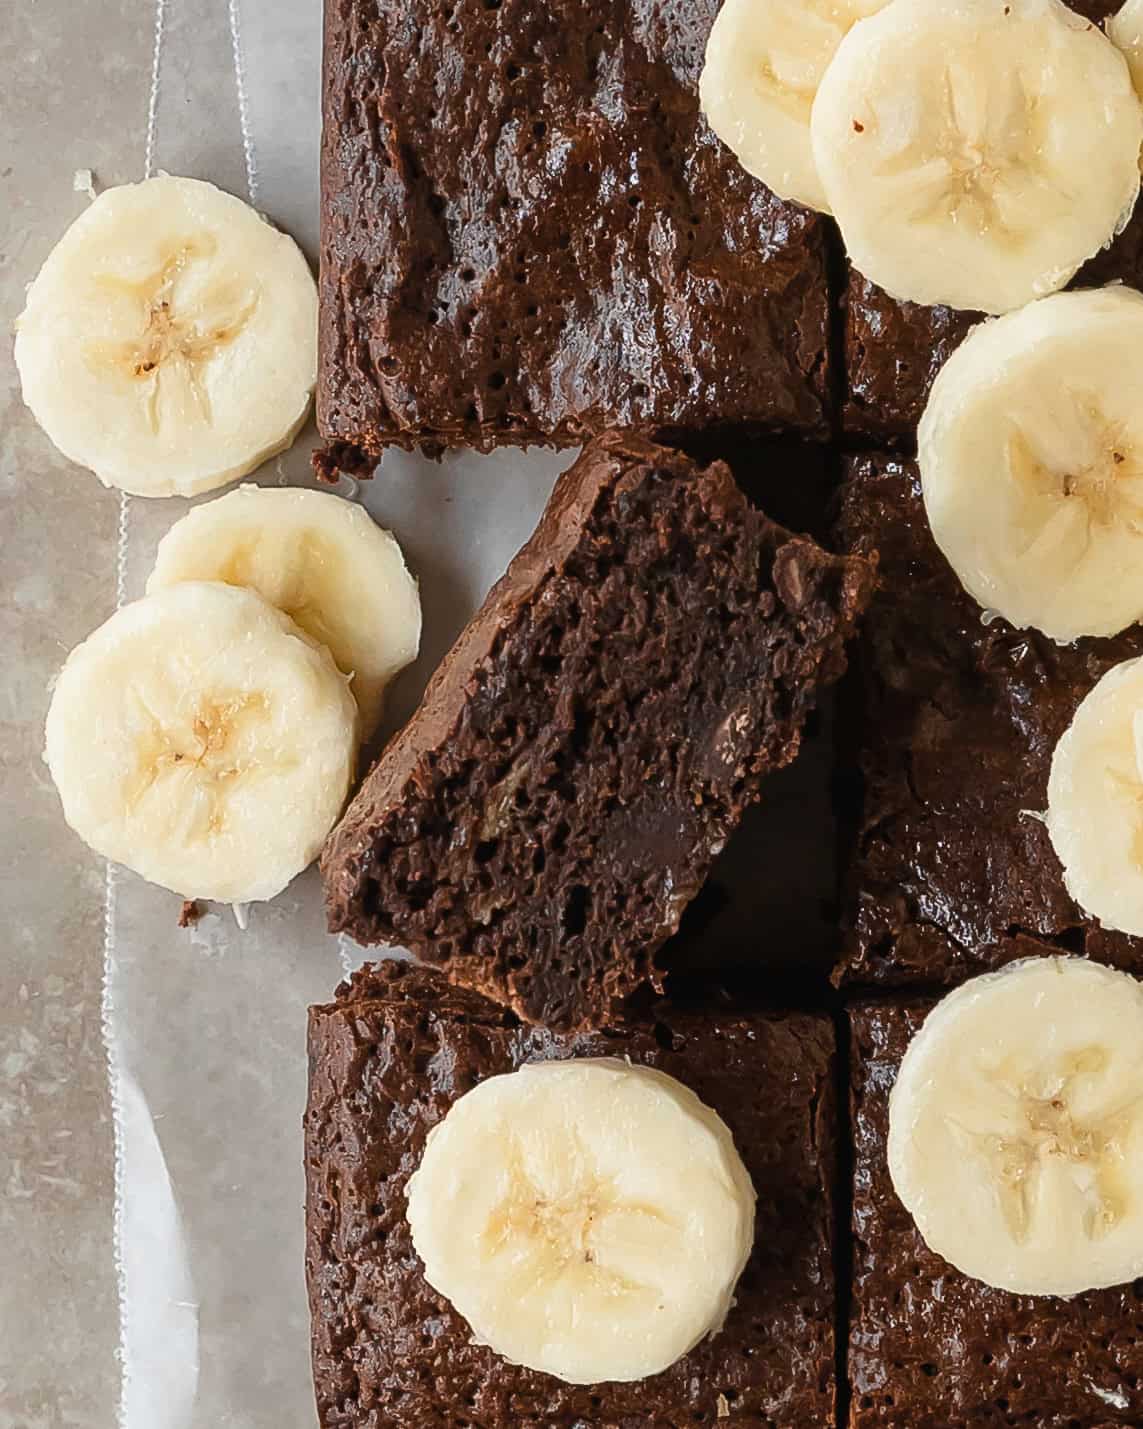 Banana brownies are rich, fudgy and chewy brownies made with creamy bananas. The indulgently deep chocolate flavor of the brownies is perfectly balanced with the subtle sweetness of ripe bananas and chocolate chips.  These banana flavored brownies are easy to make and are the perfect treat.  